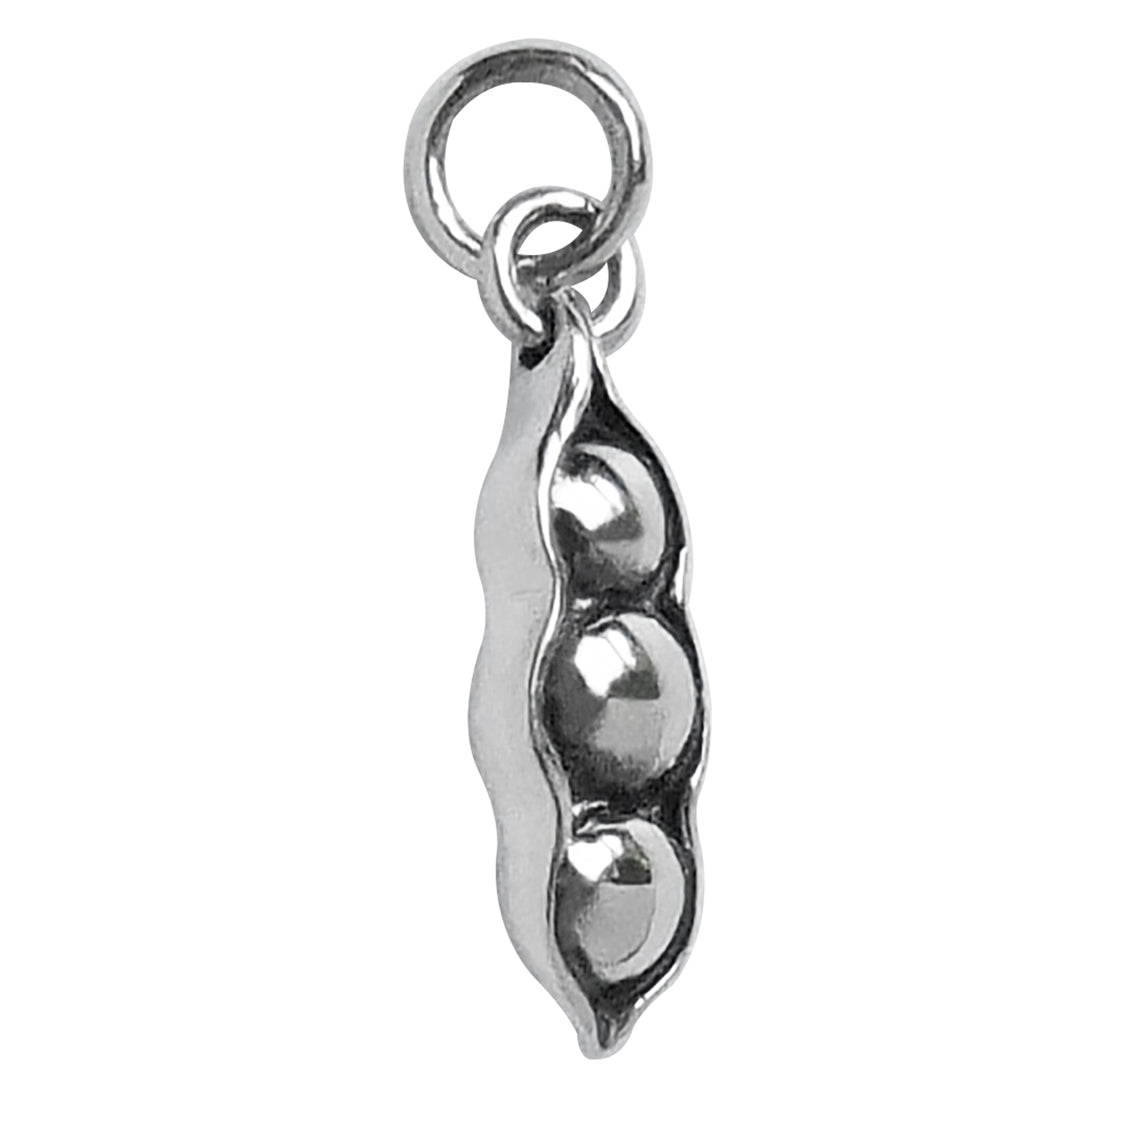 Three peas in a pod charm sterling silver pendant